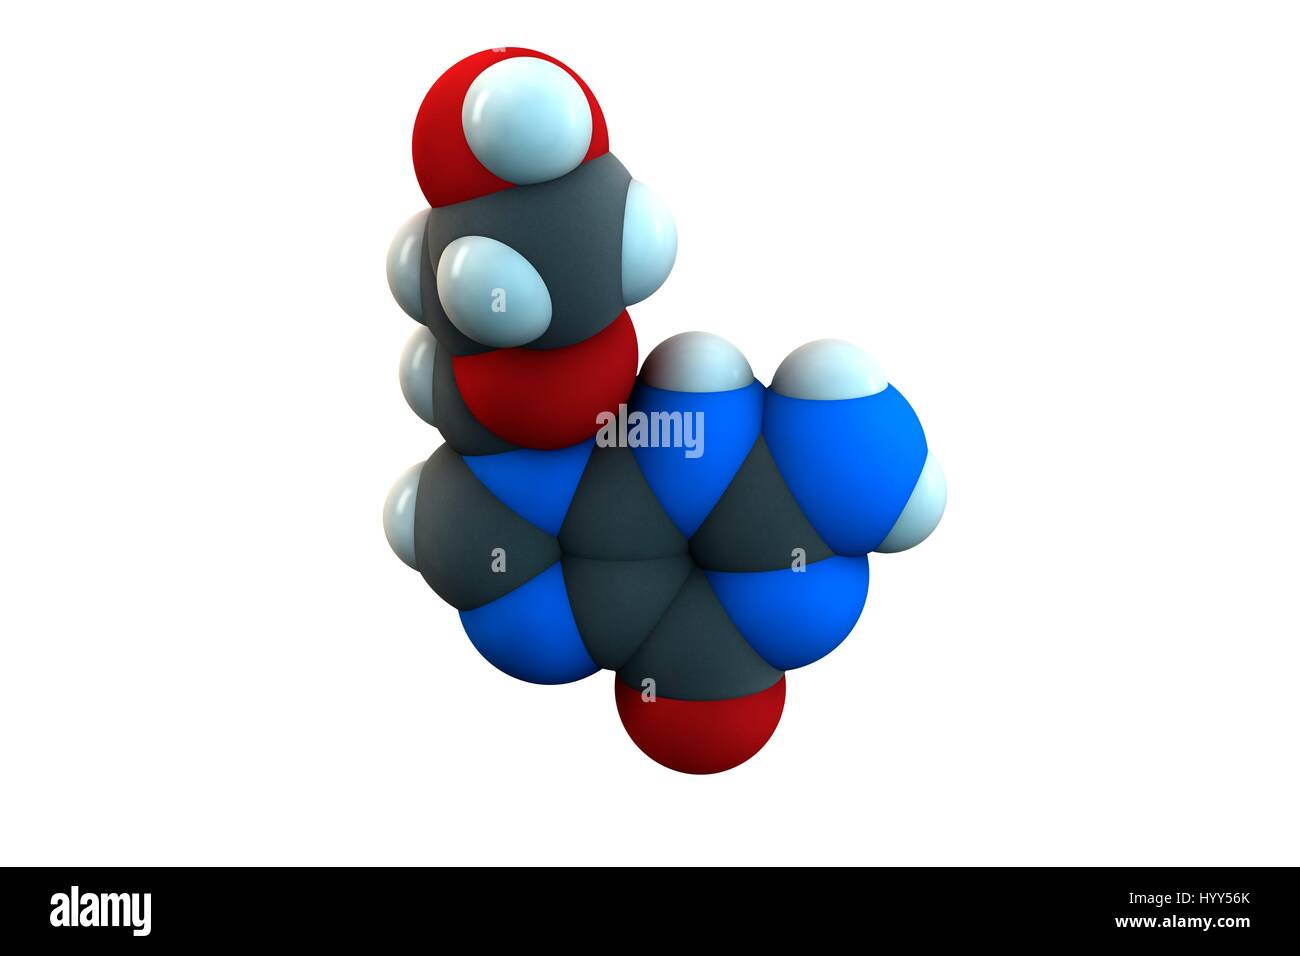 Aciclovir antiviral drug molecule. Used in treatment of herpes simplex virus (cold sores), herpes zoster (shingles) and varicella zoster (chickenpox). Chemical formula is C8H11N5O3. Atoms are represented as spheres: carbon (grey), hydrogen (white), nitrogen (blue), oxygen (red). Illustration. Stock Photo